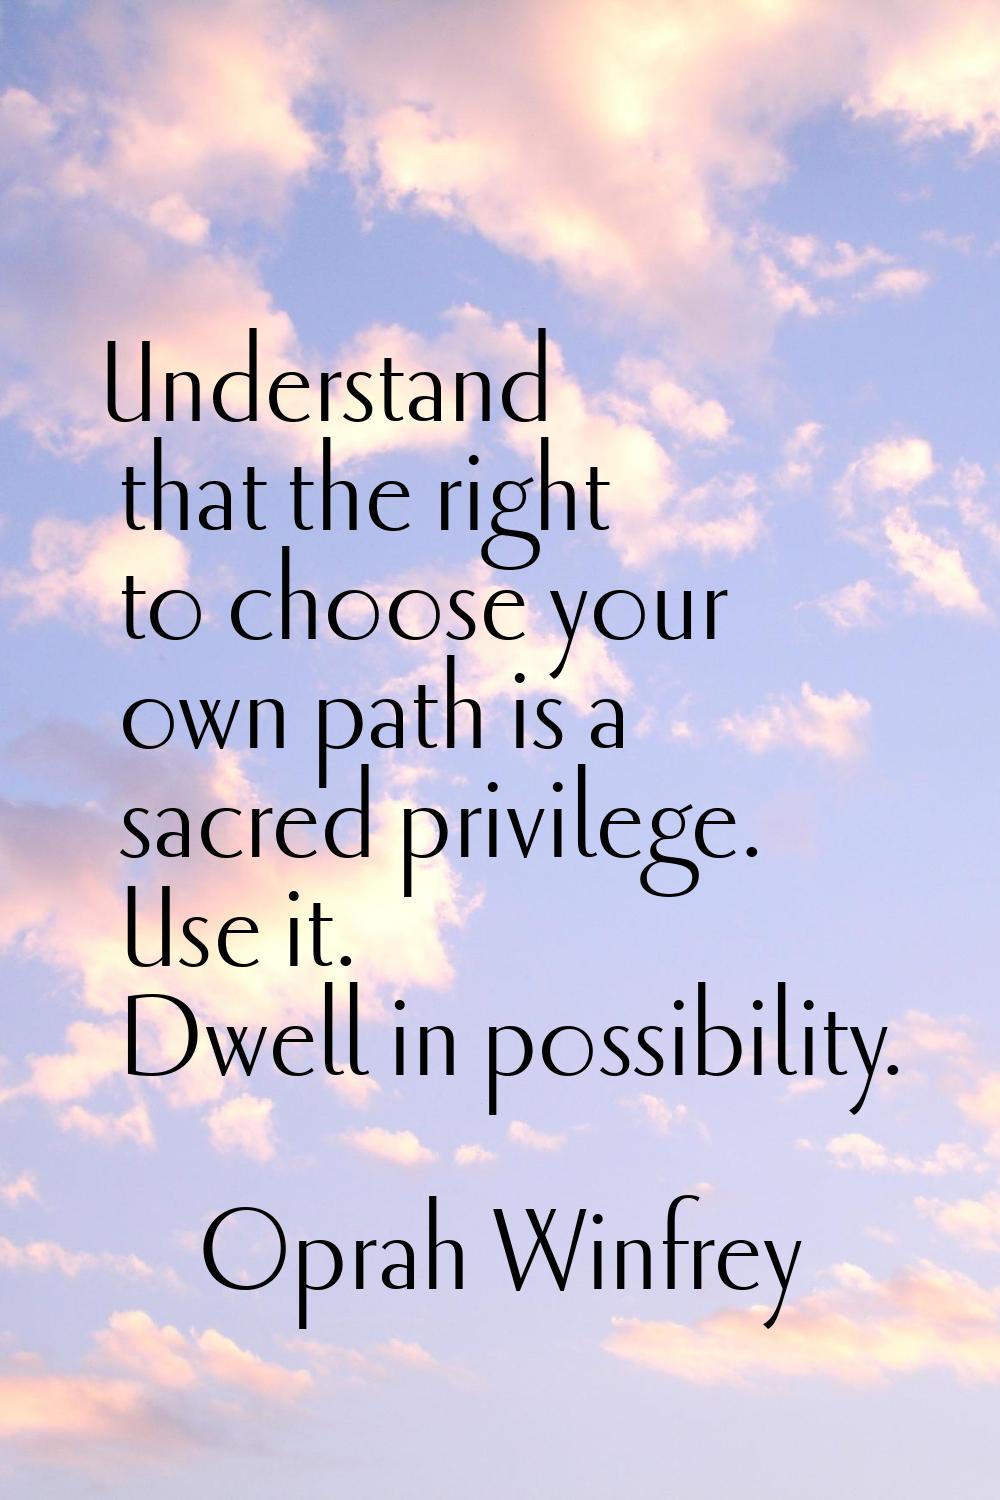 Understand that the right to choose your own path is a sacred privilege. Use it. Dwell in possibili